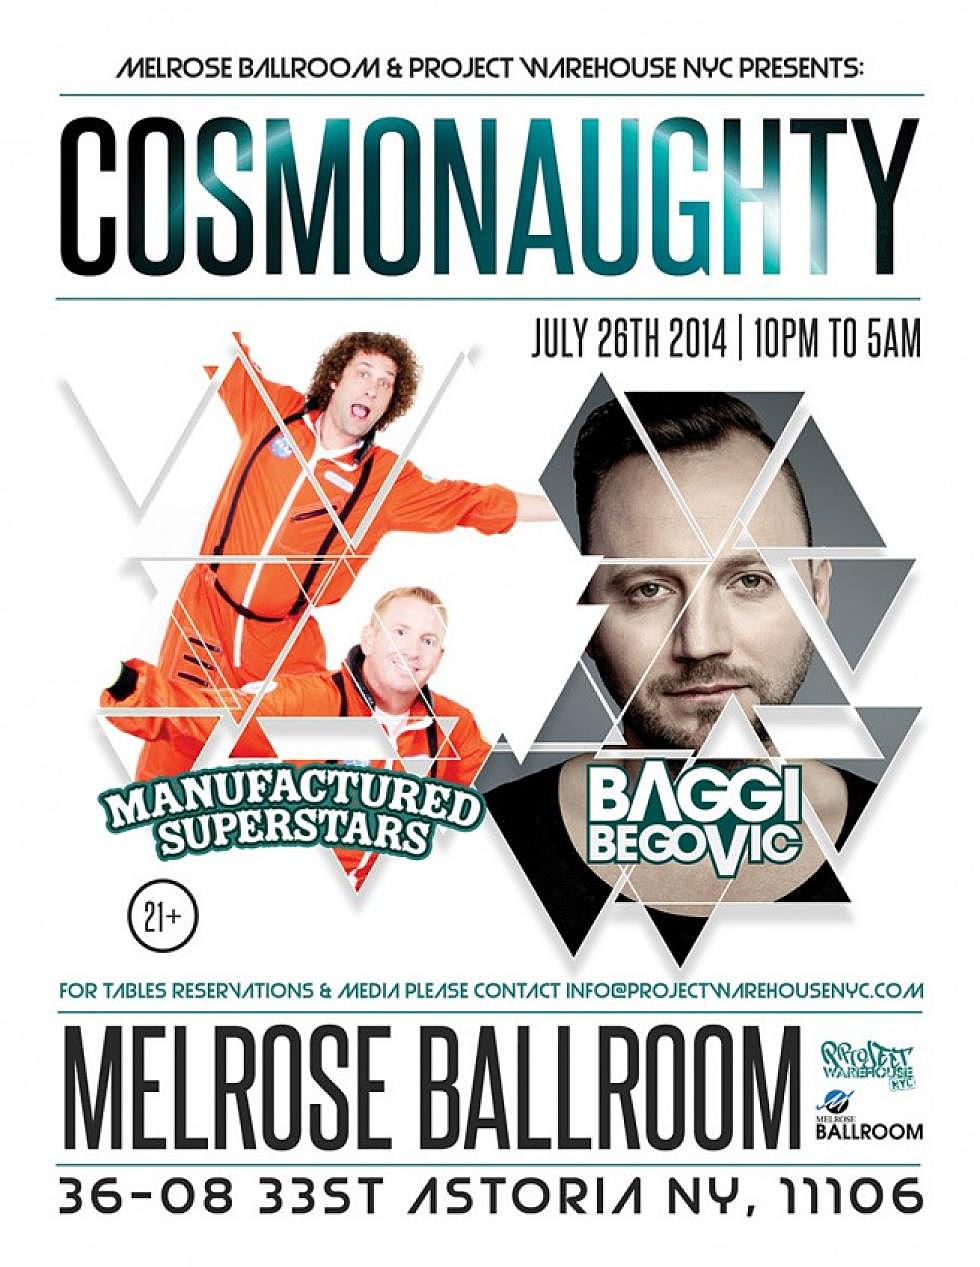 Project Warehouse NYC to host Manufactured Superstars &#038; Baggi Begovic, July 26th!